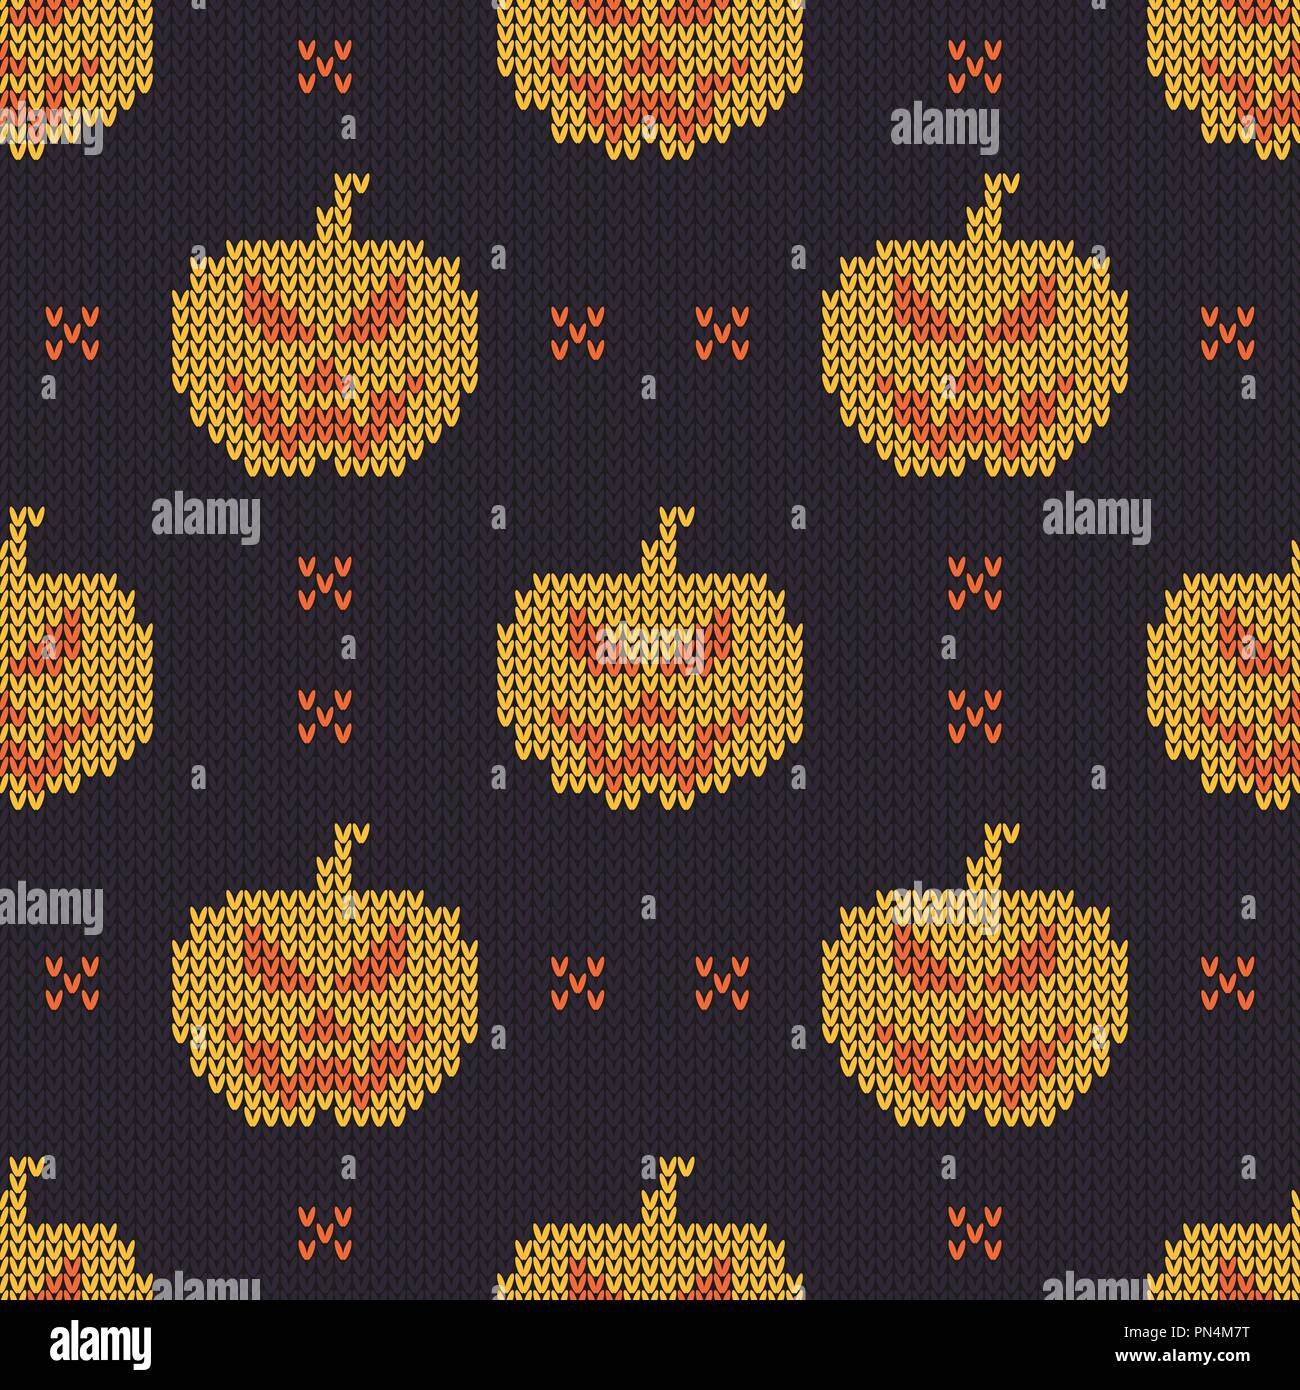 Halloween knitted pattern. Seamless Knitting Texture with cute pumpkin. Design for sweater, scarf, comforter or clothes texture. Vector illustration. Stock Vector